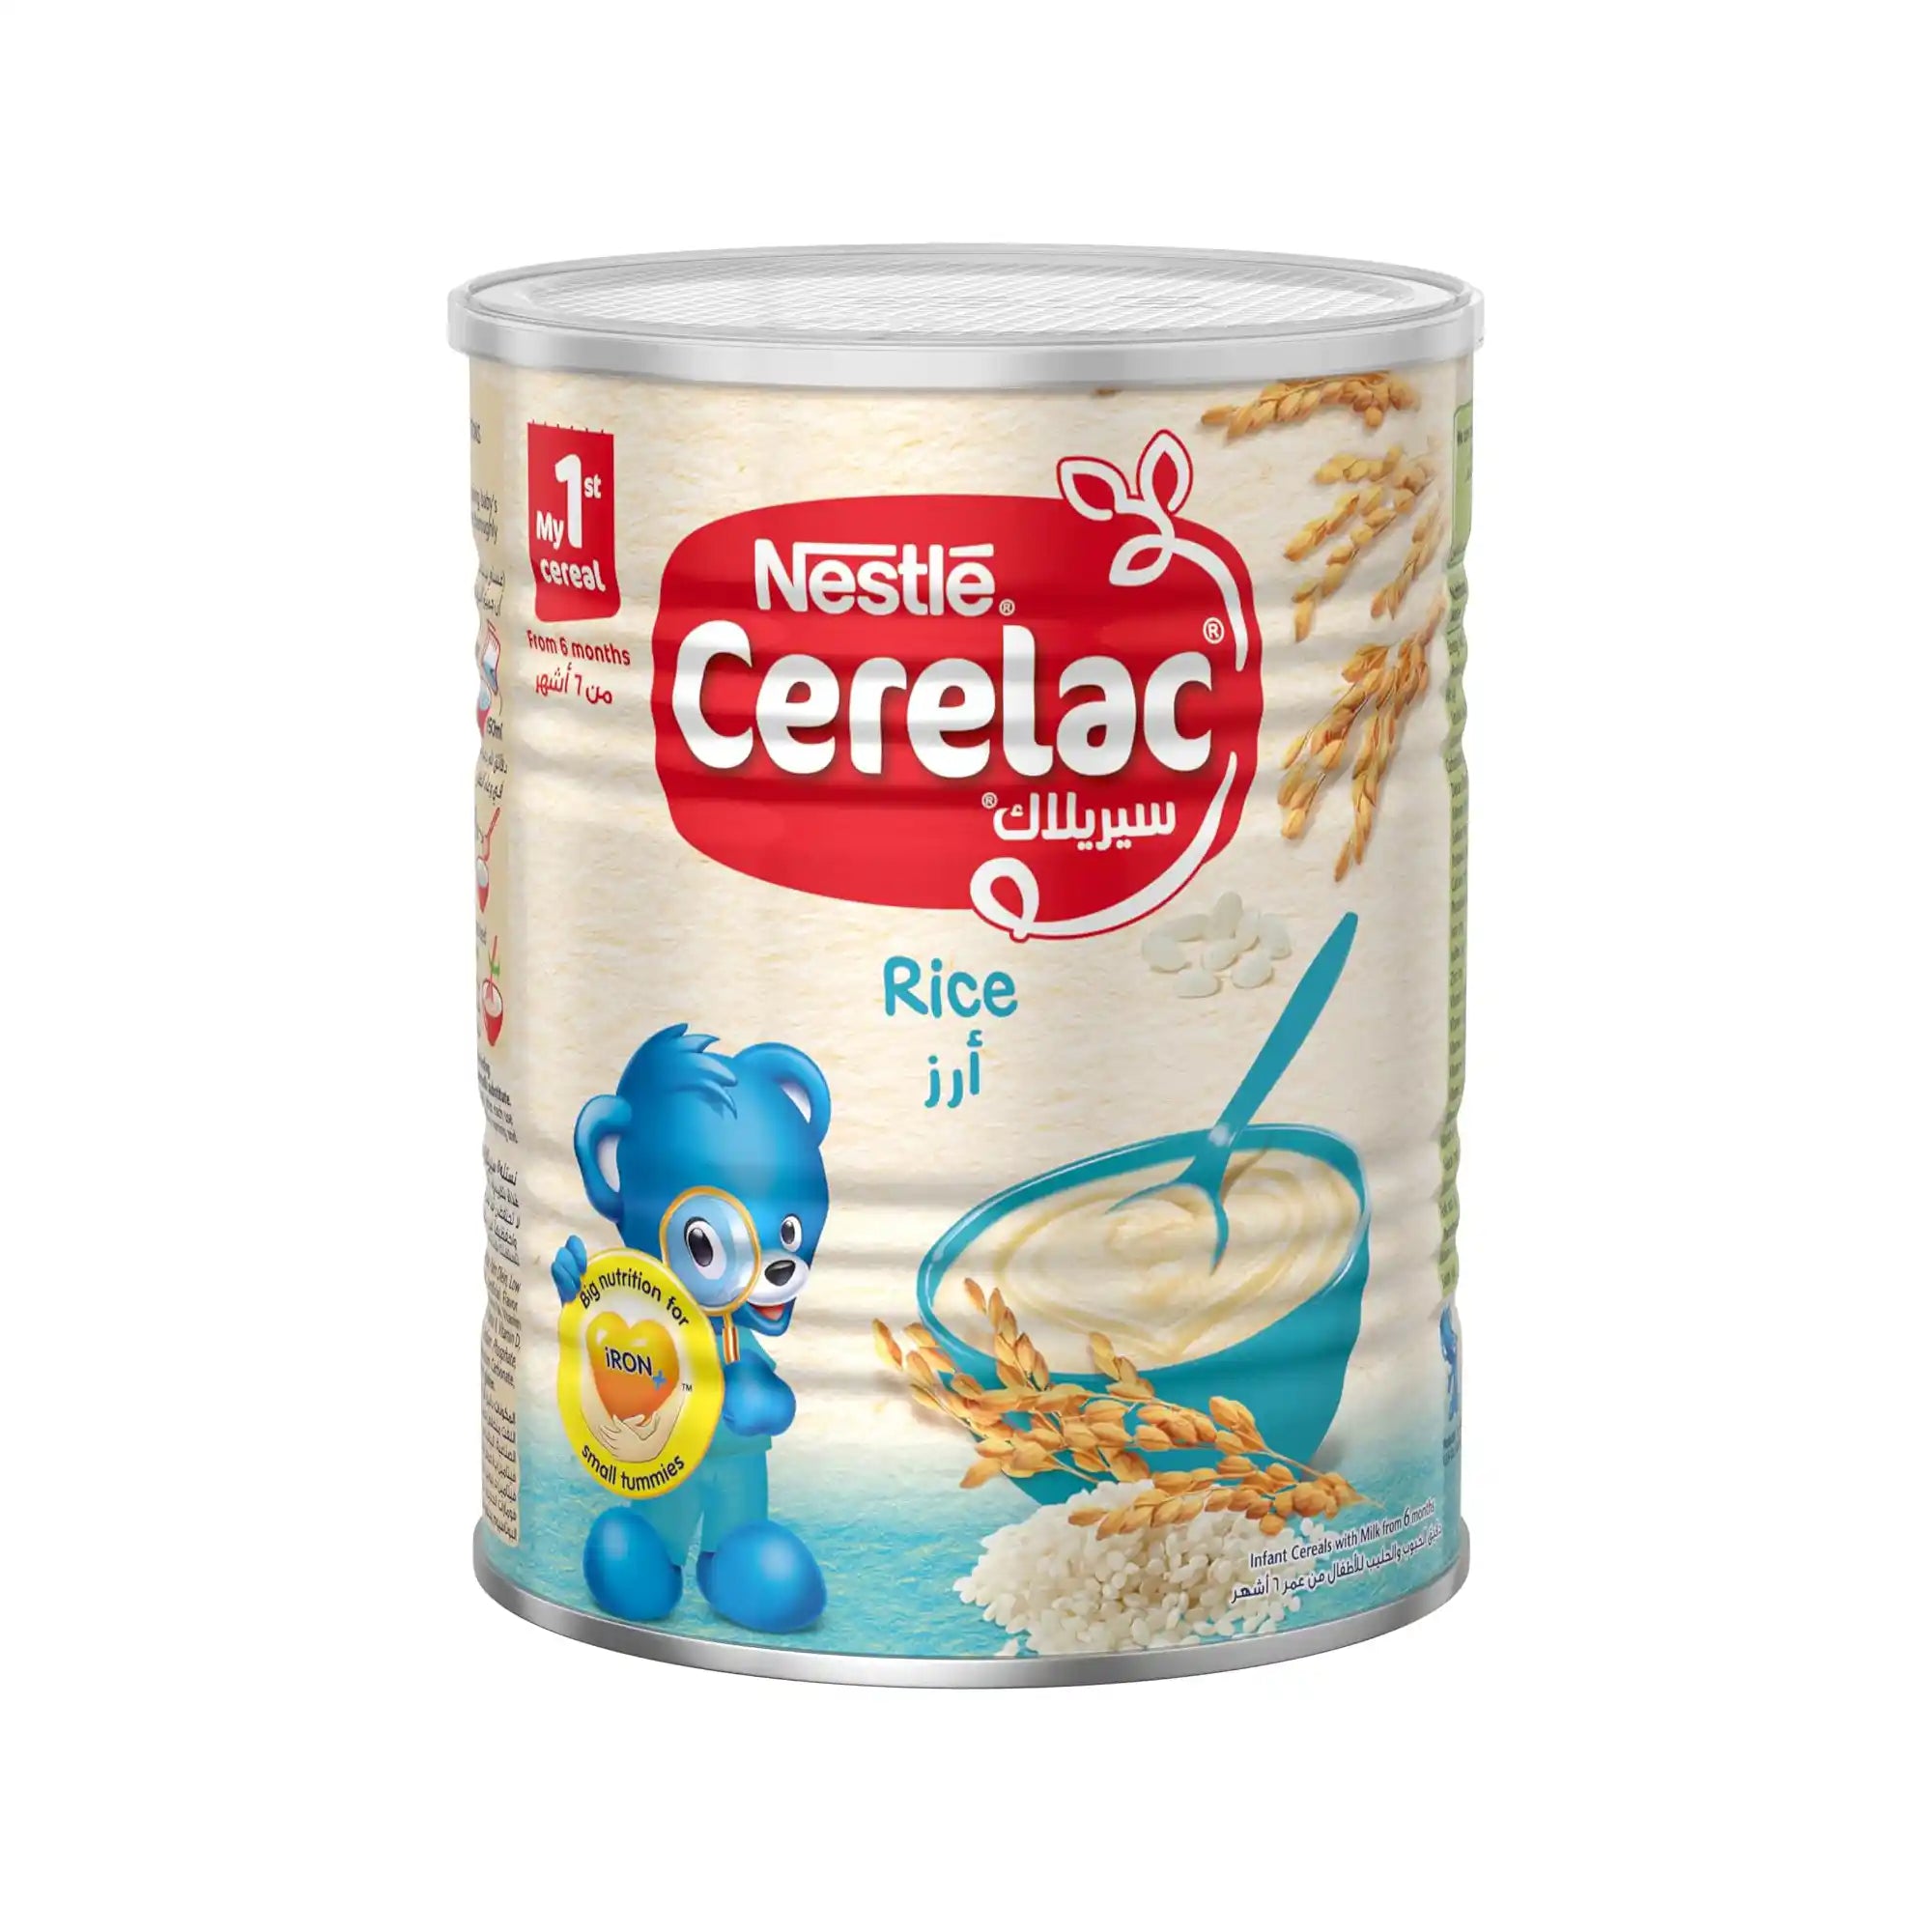 Nestle Cerelac Baby Rice with Milk - 6+months, 400gms, (Imported Tin Pack)